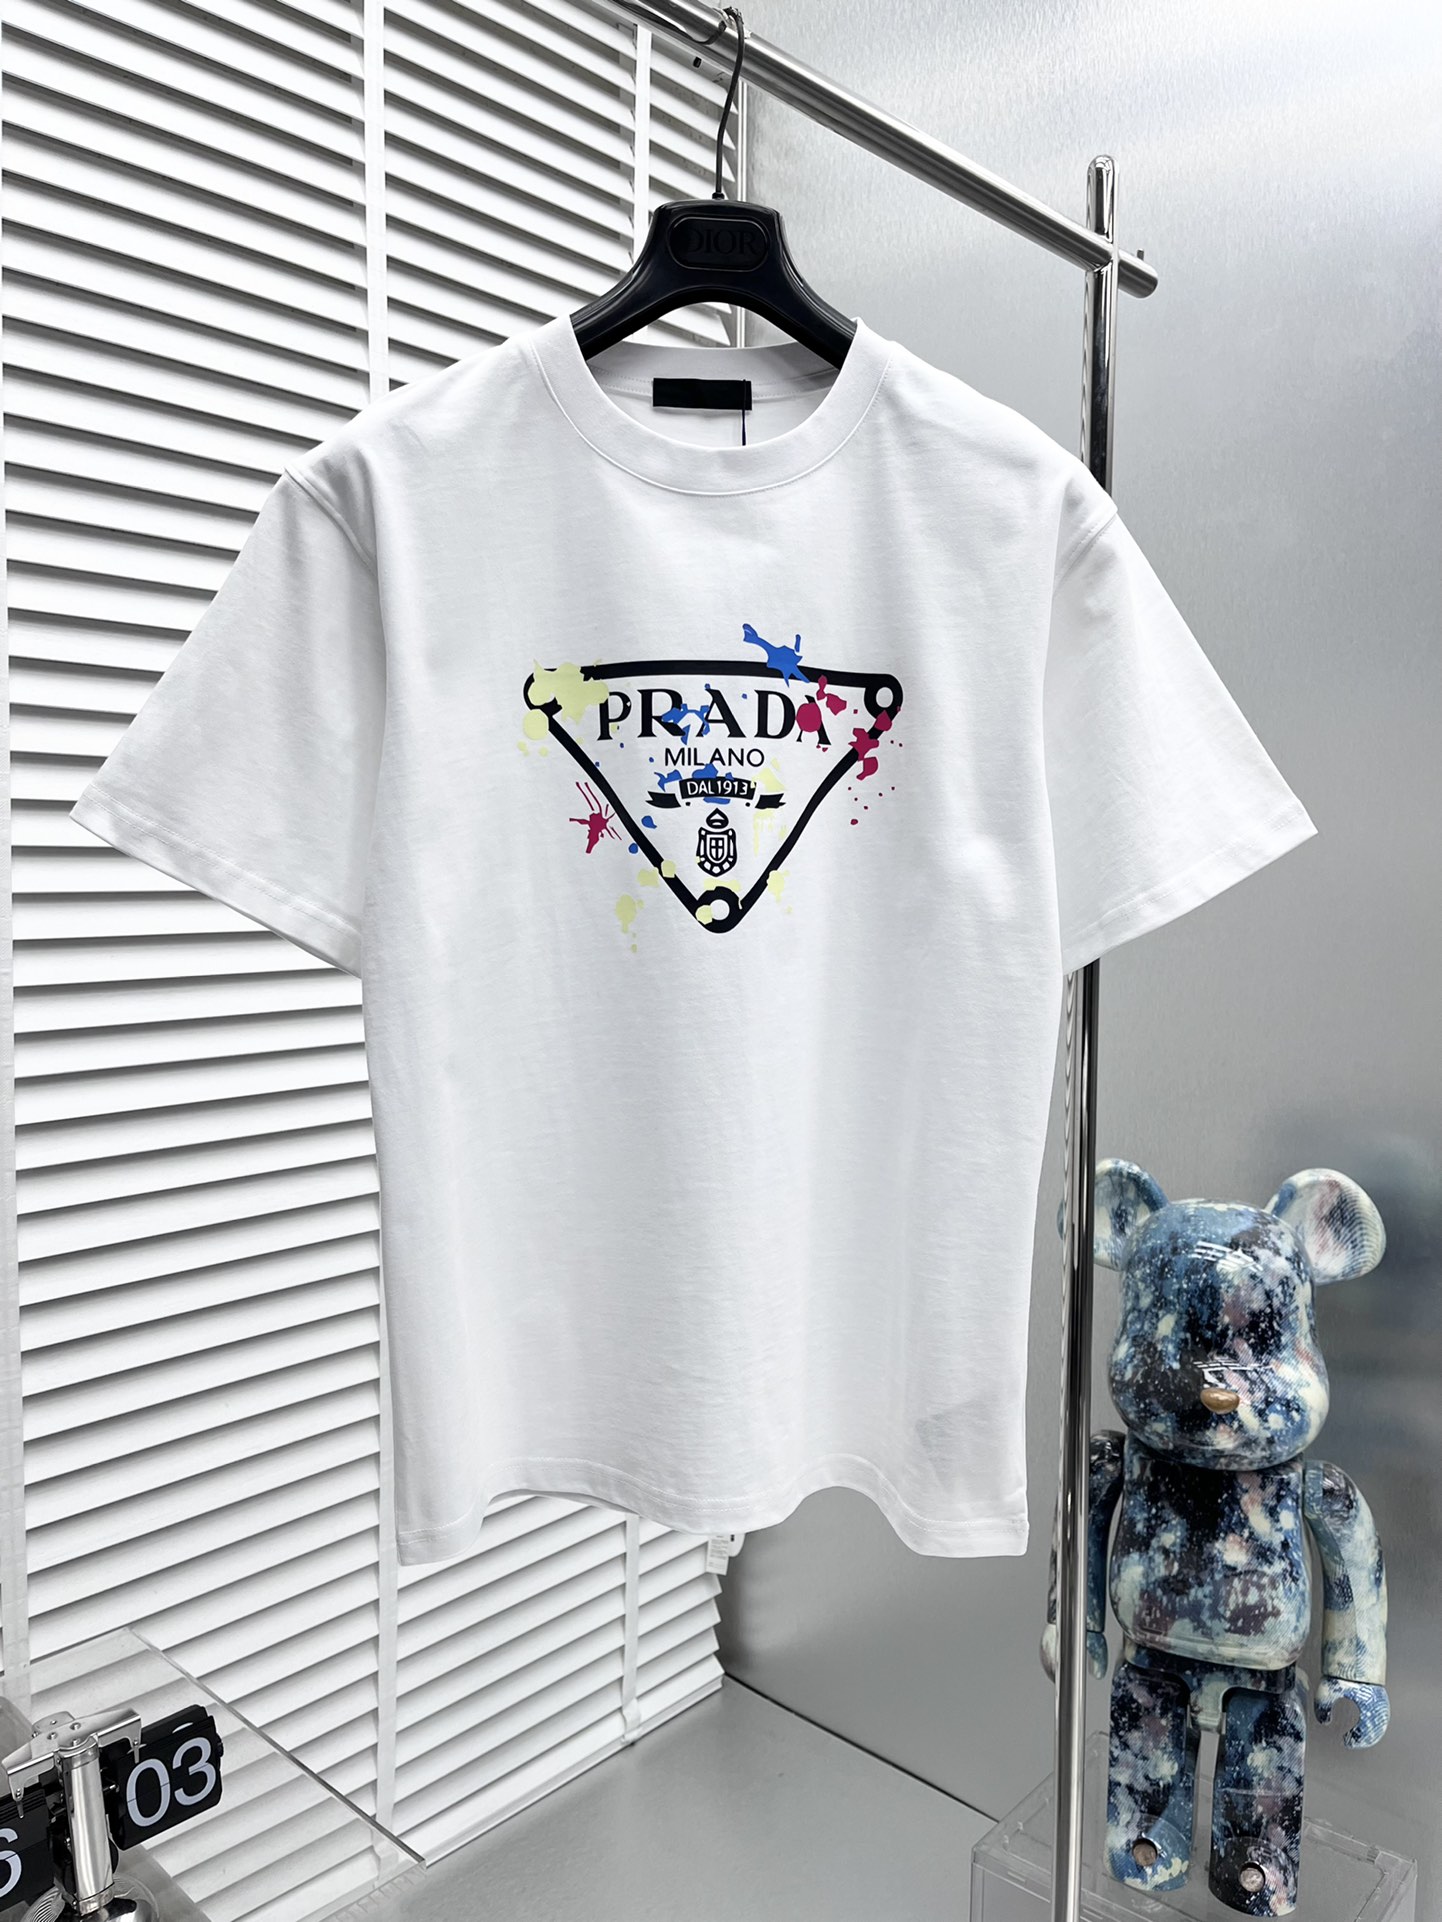 Prada Clothing T-Shirt Find replica
 Black White Printing Unisex Spring/Summer Collection Short Sleeve